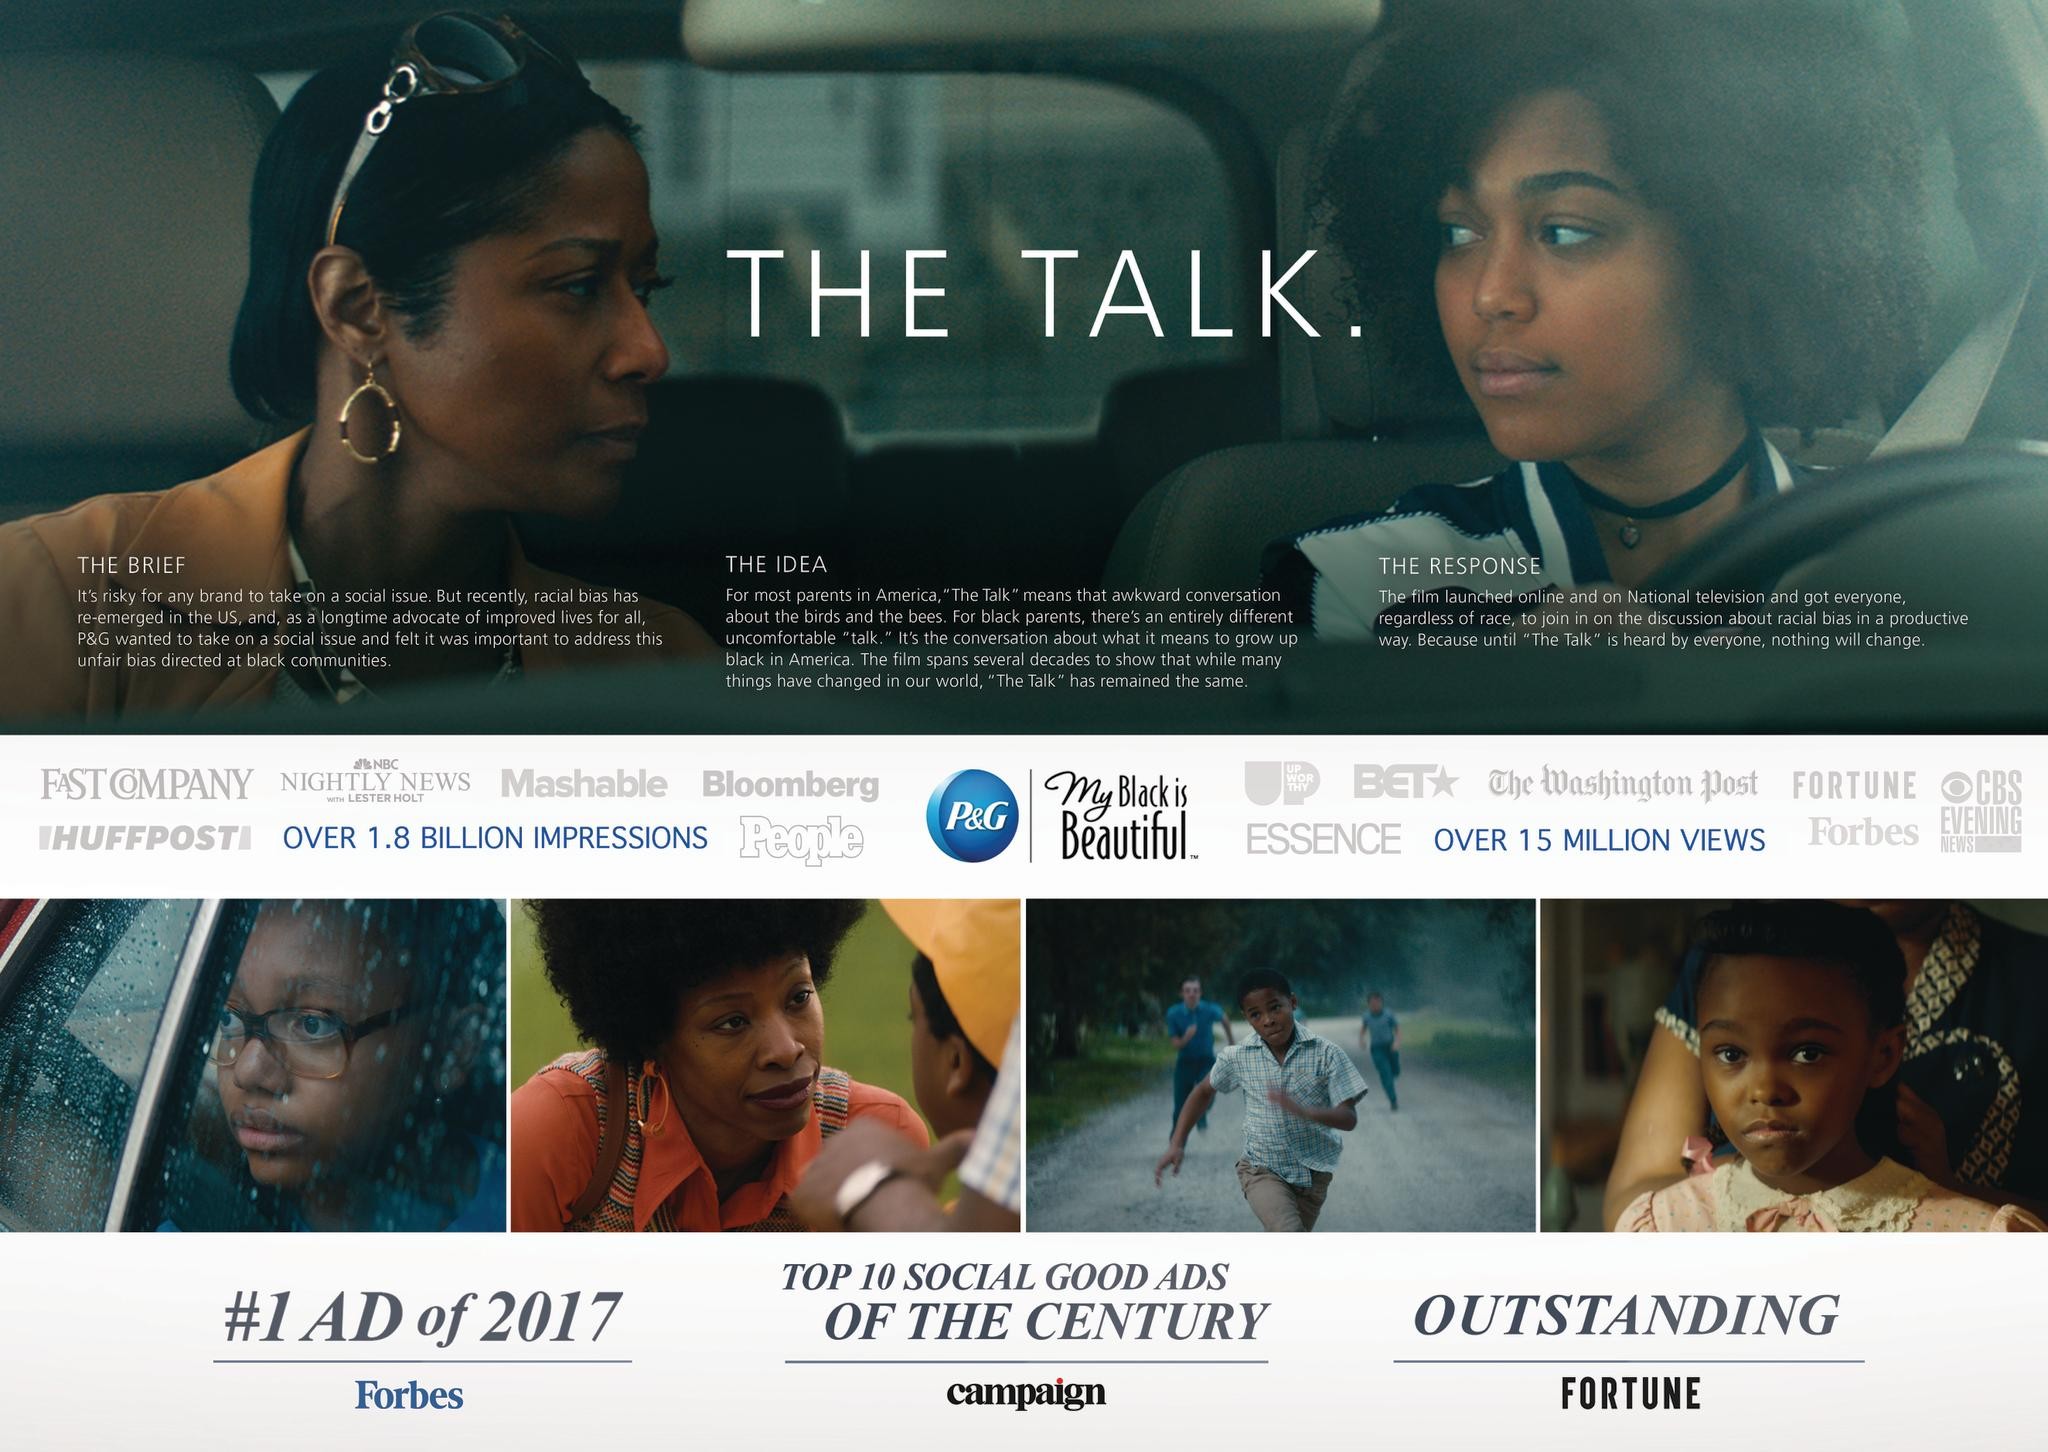 P&G + MBIB “THE TALK” – Creating a National Movement to End “The Talk” and Racial Bias